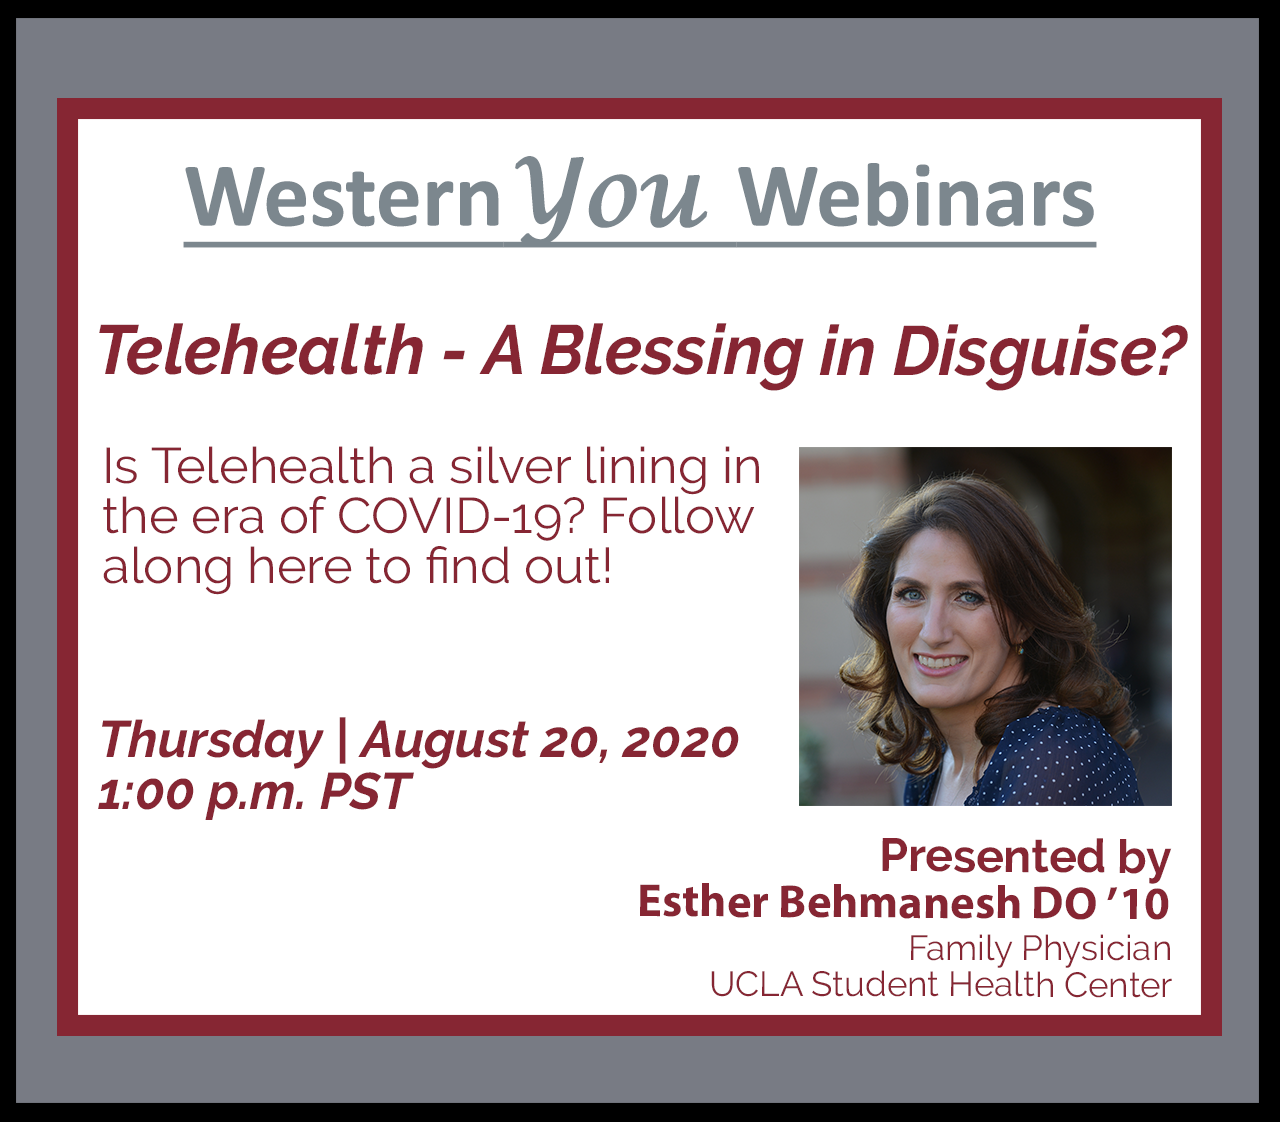 Telehealth - A Blessing in Disguise